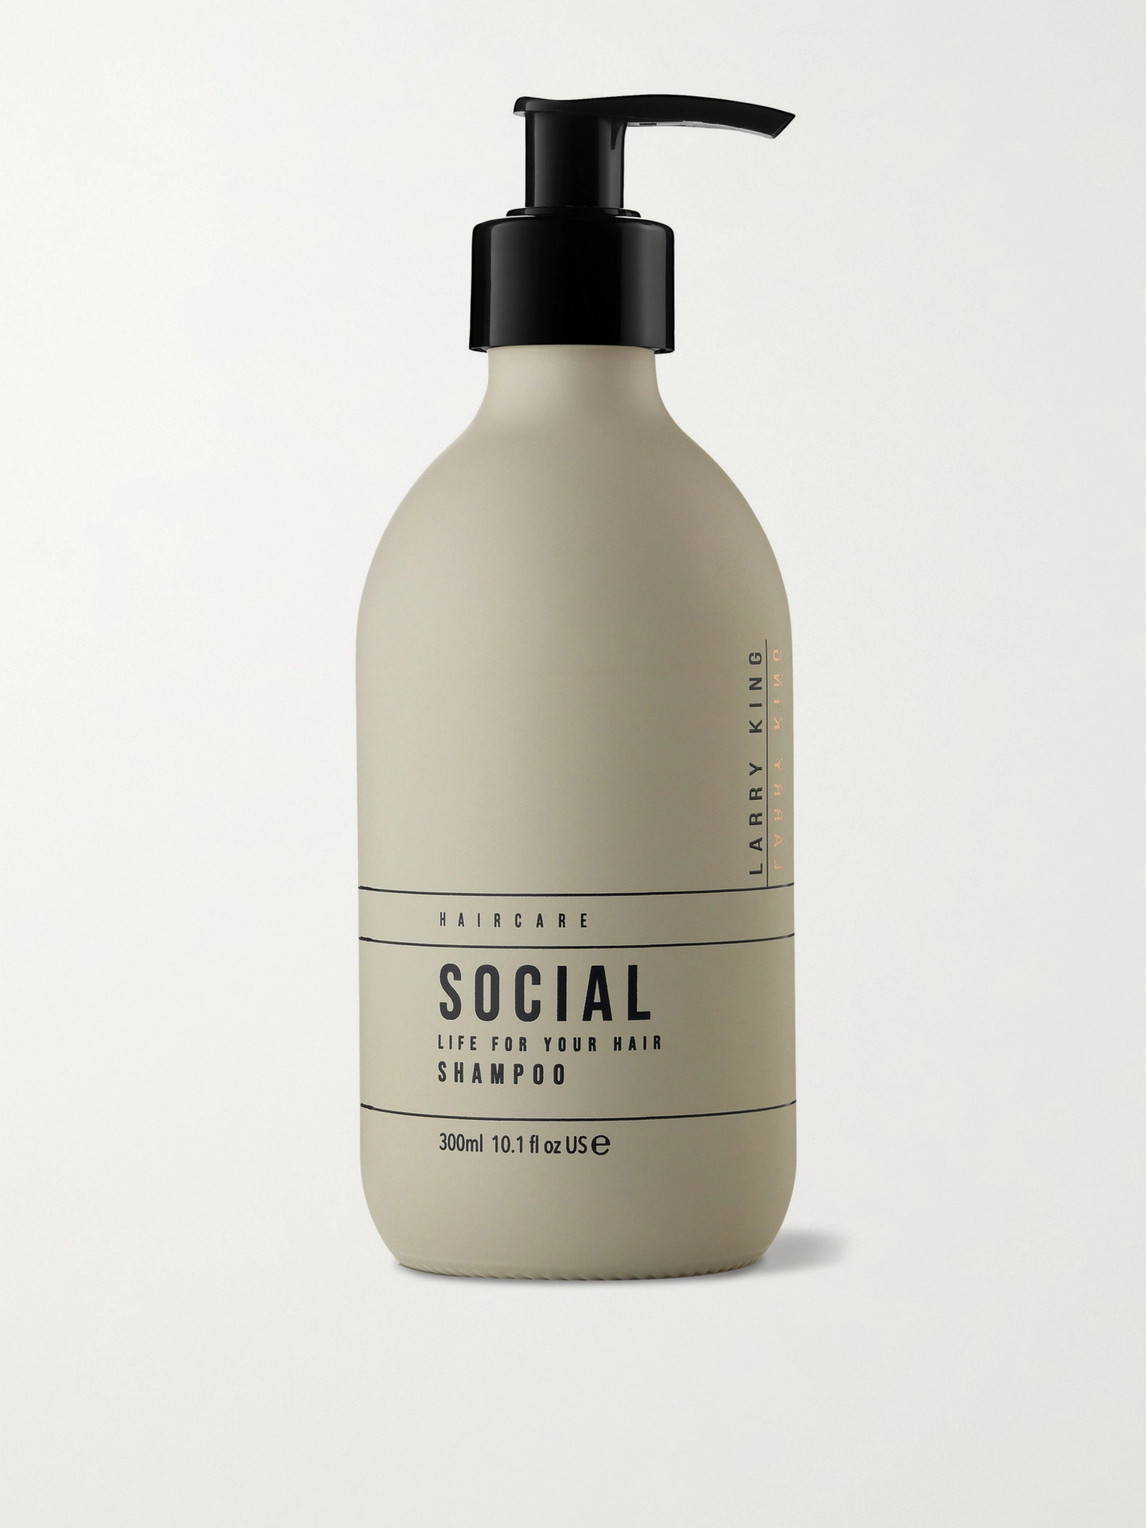 Larry King Social Life Shampoo Bottle 300ml In Colorless